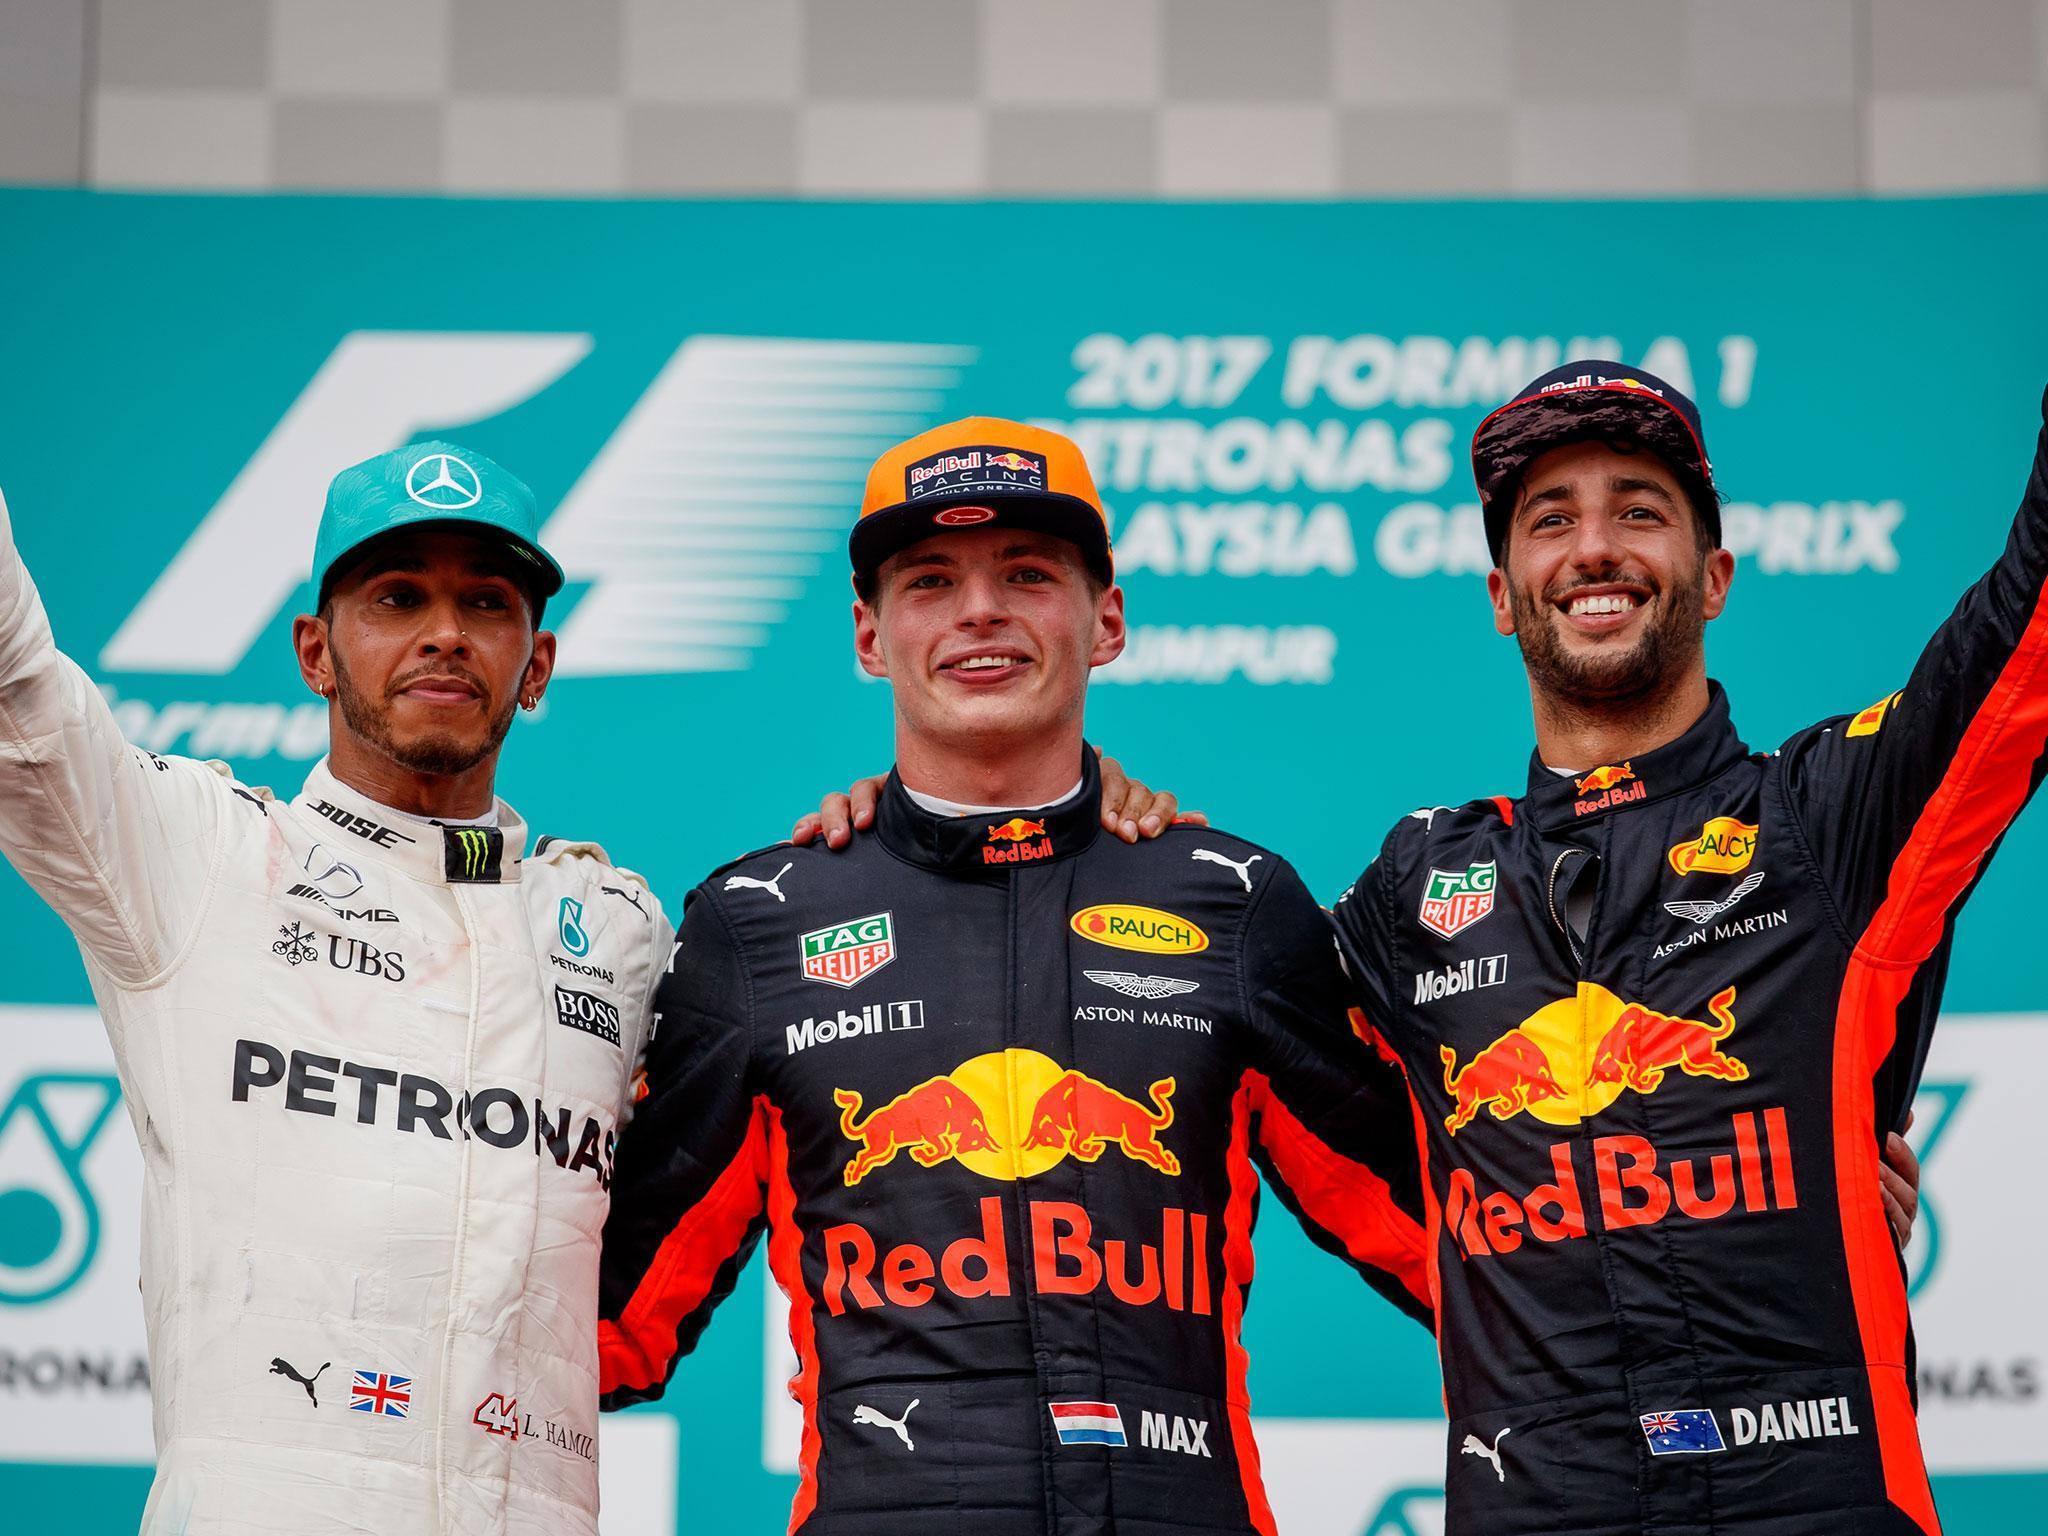 With Red Bull on the charge Lewis Hamilton knows he still has work to do to seal the title